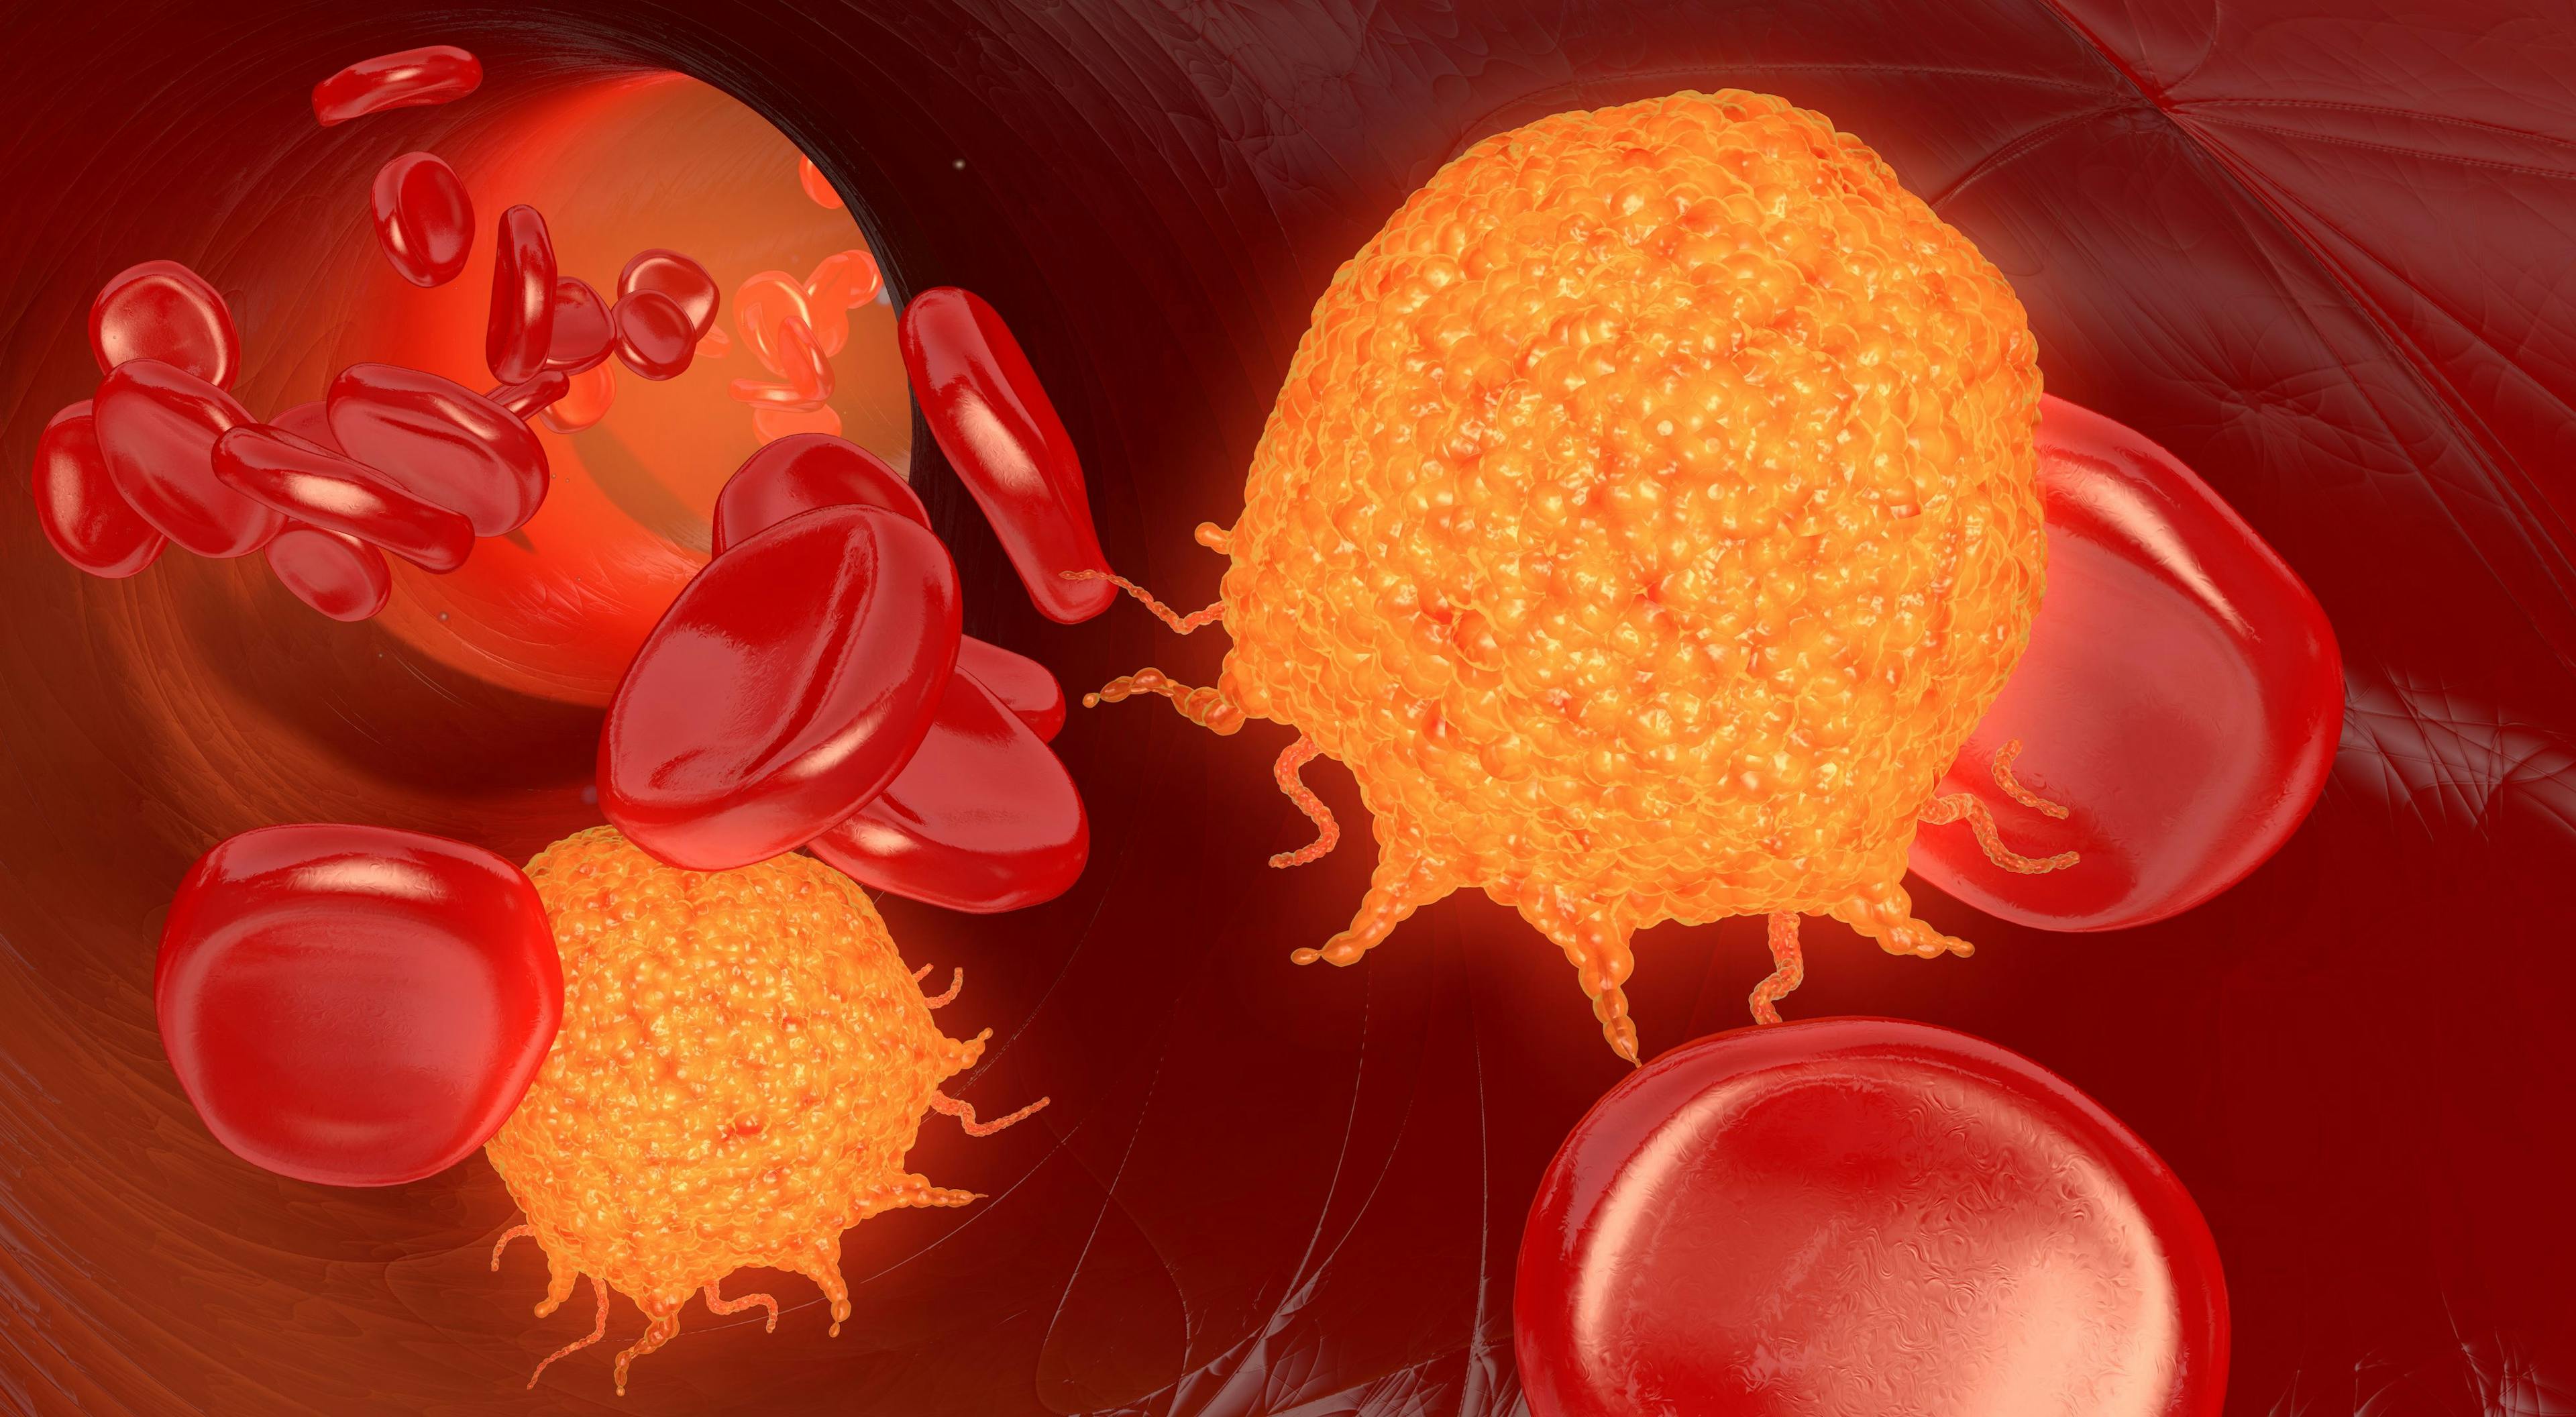 Blood Cancer Therapies May Play a Role in Treating COVID-19